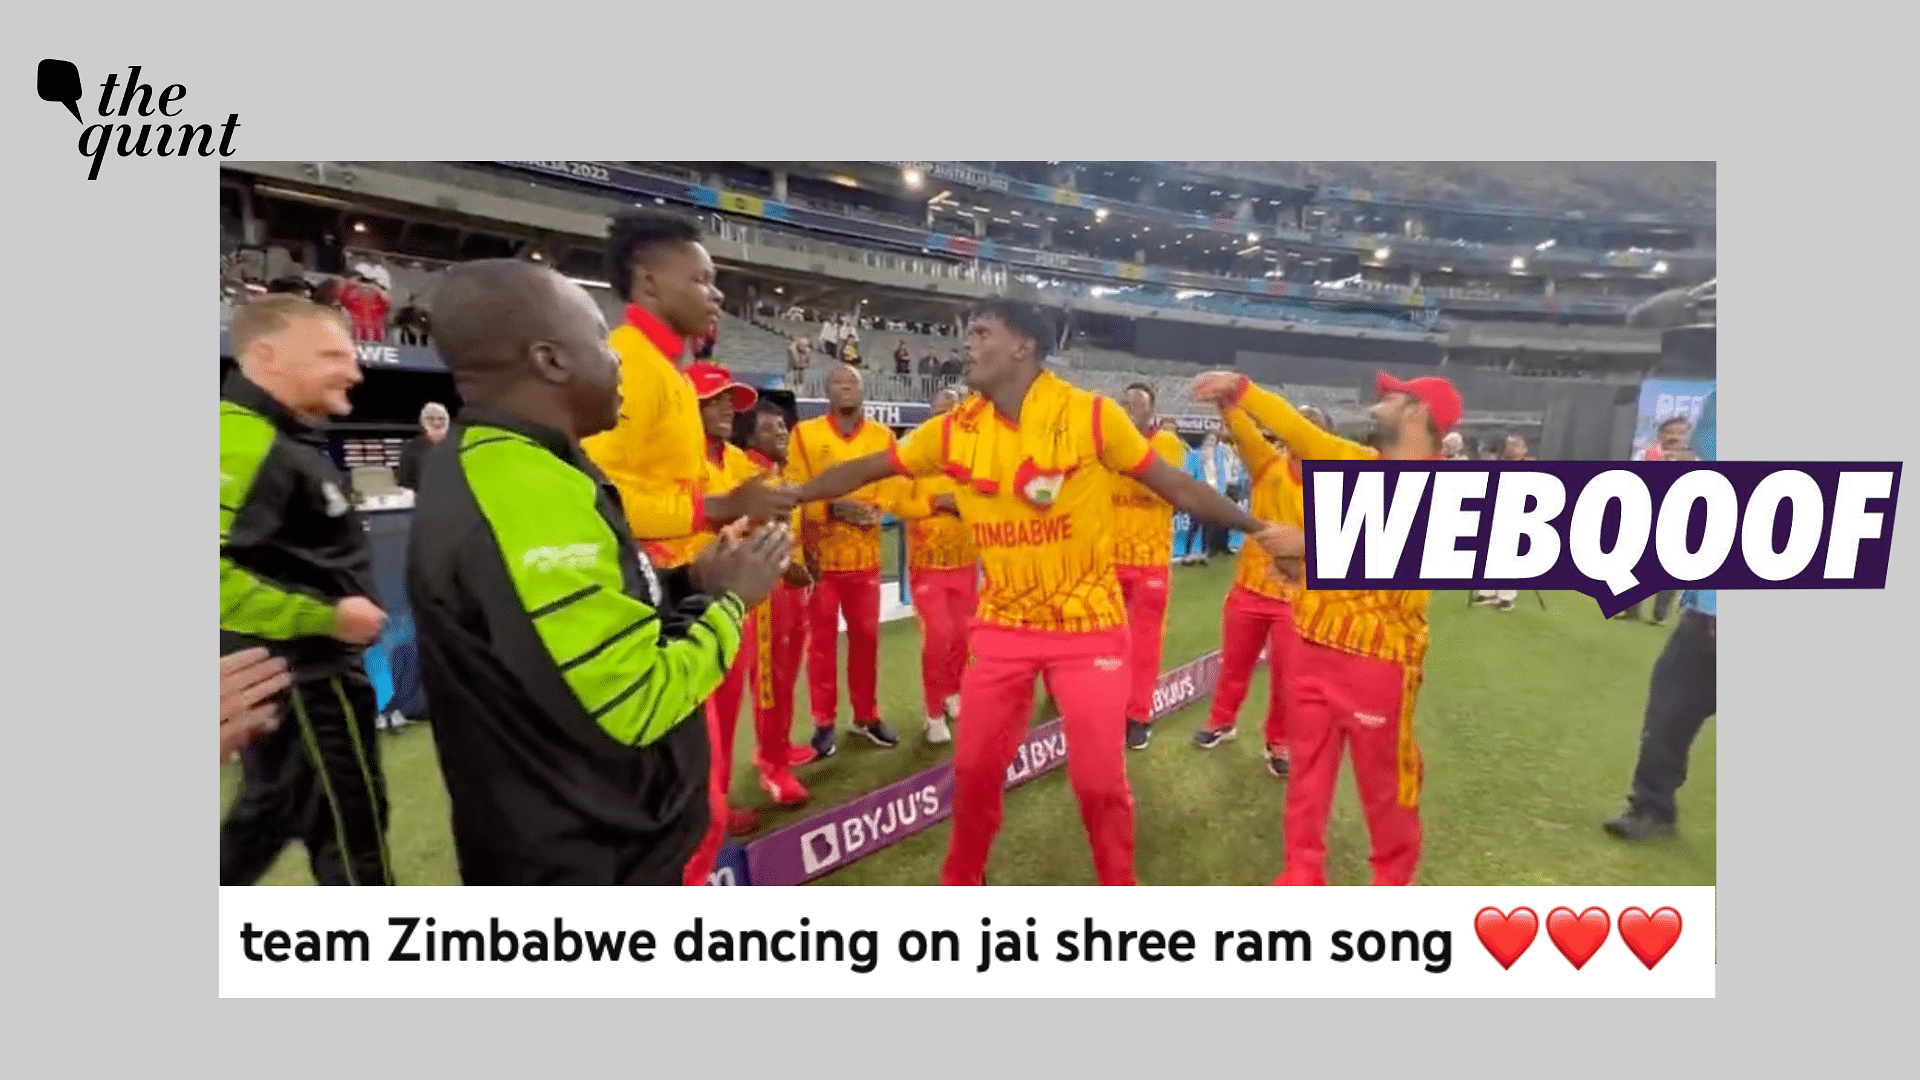 Fact-check Did Zimbabwes Cricket Team Celebrate Their Win Against Pakistan by Dancing to a Jai Shri Ram Song? No!